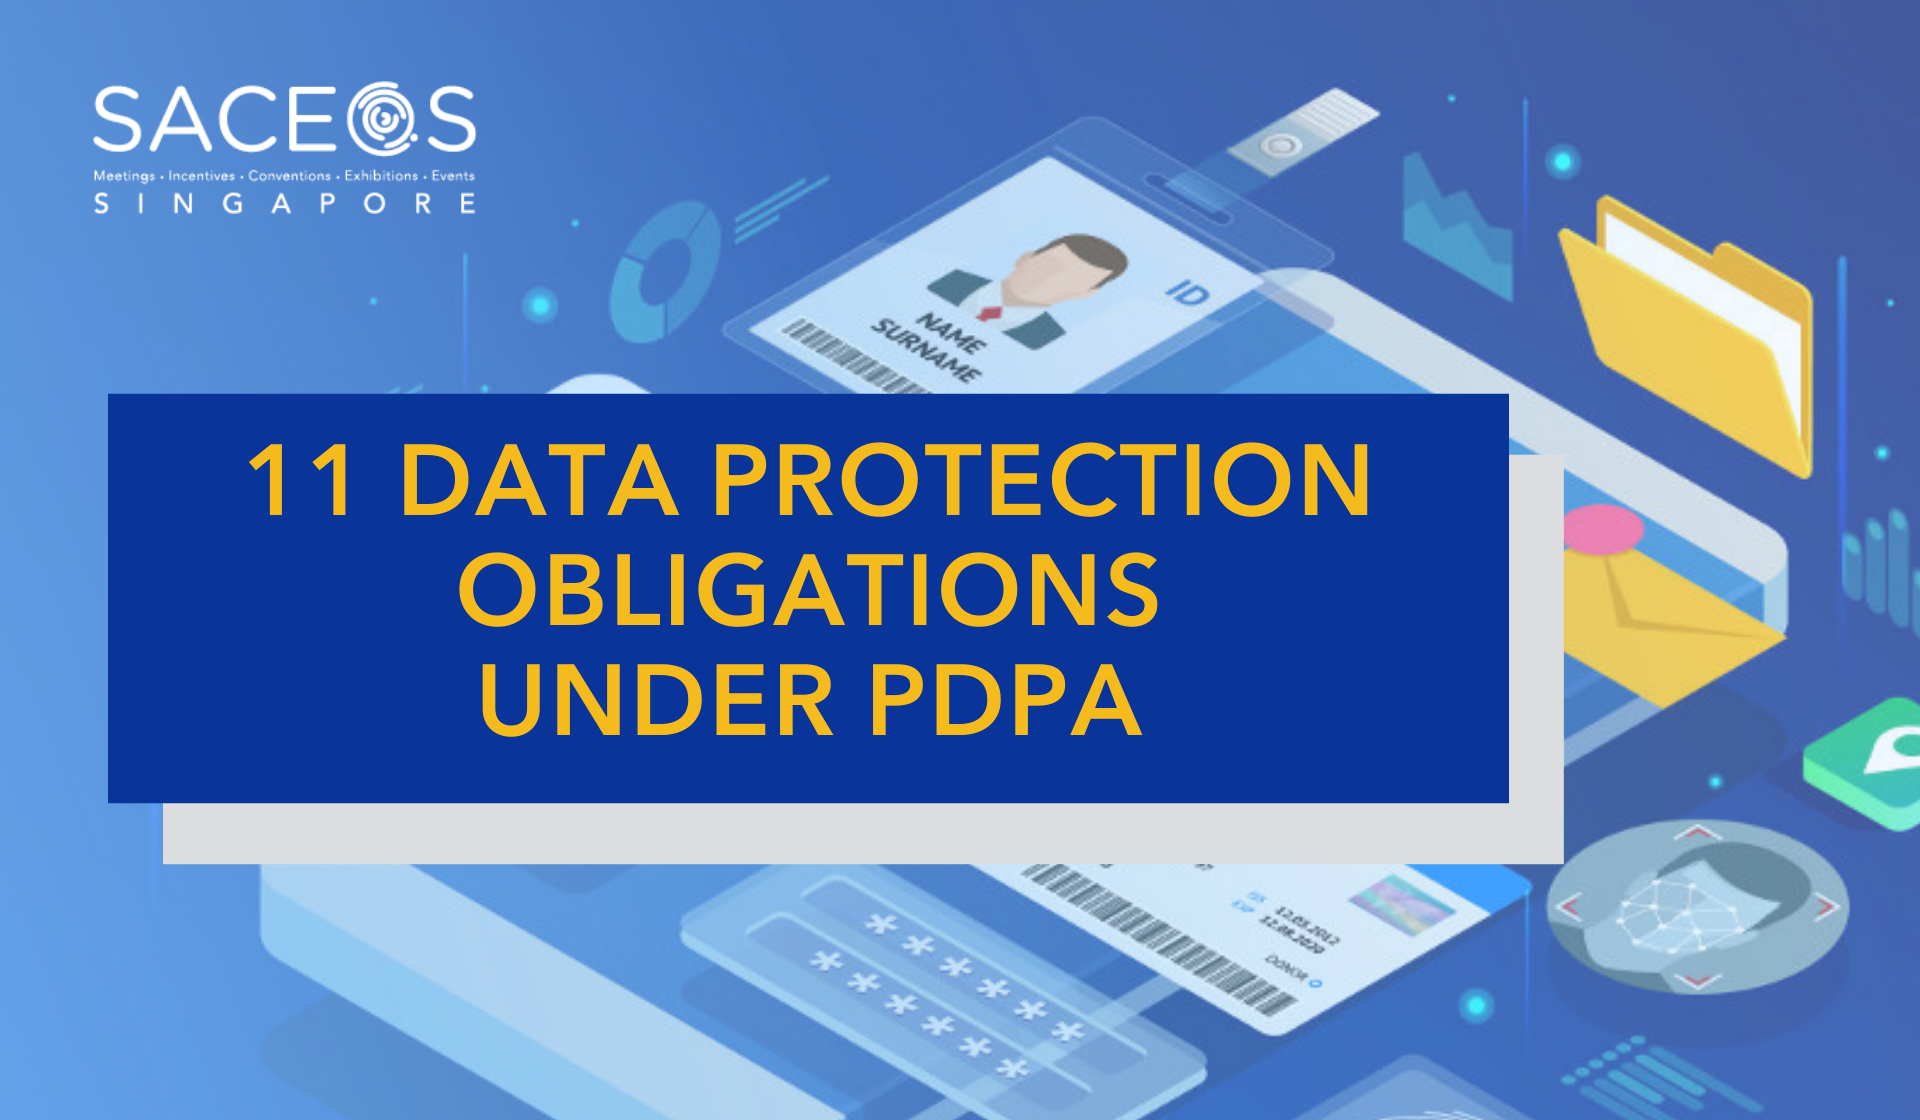 What are your Data Protection obligations under PDPA?